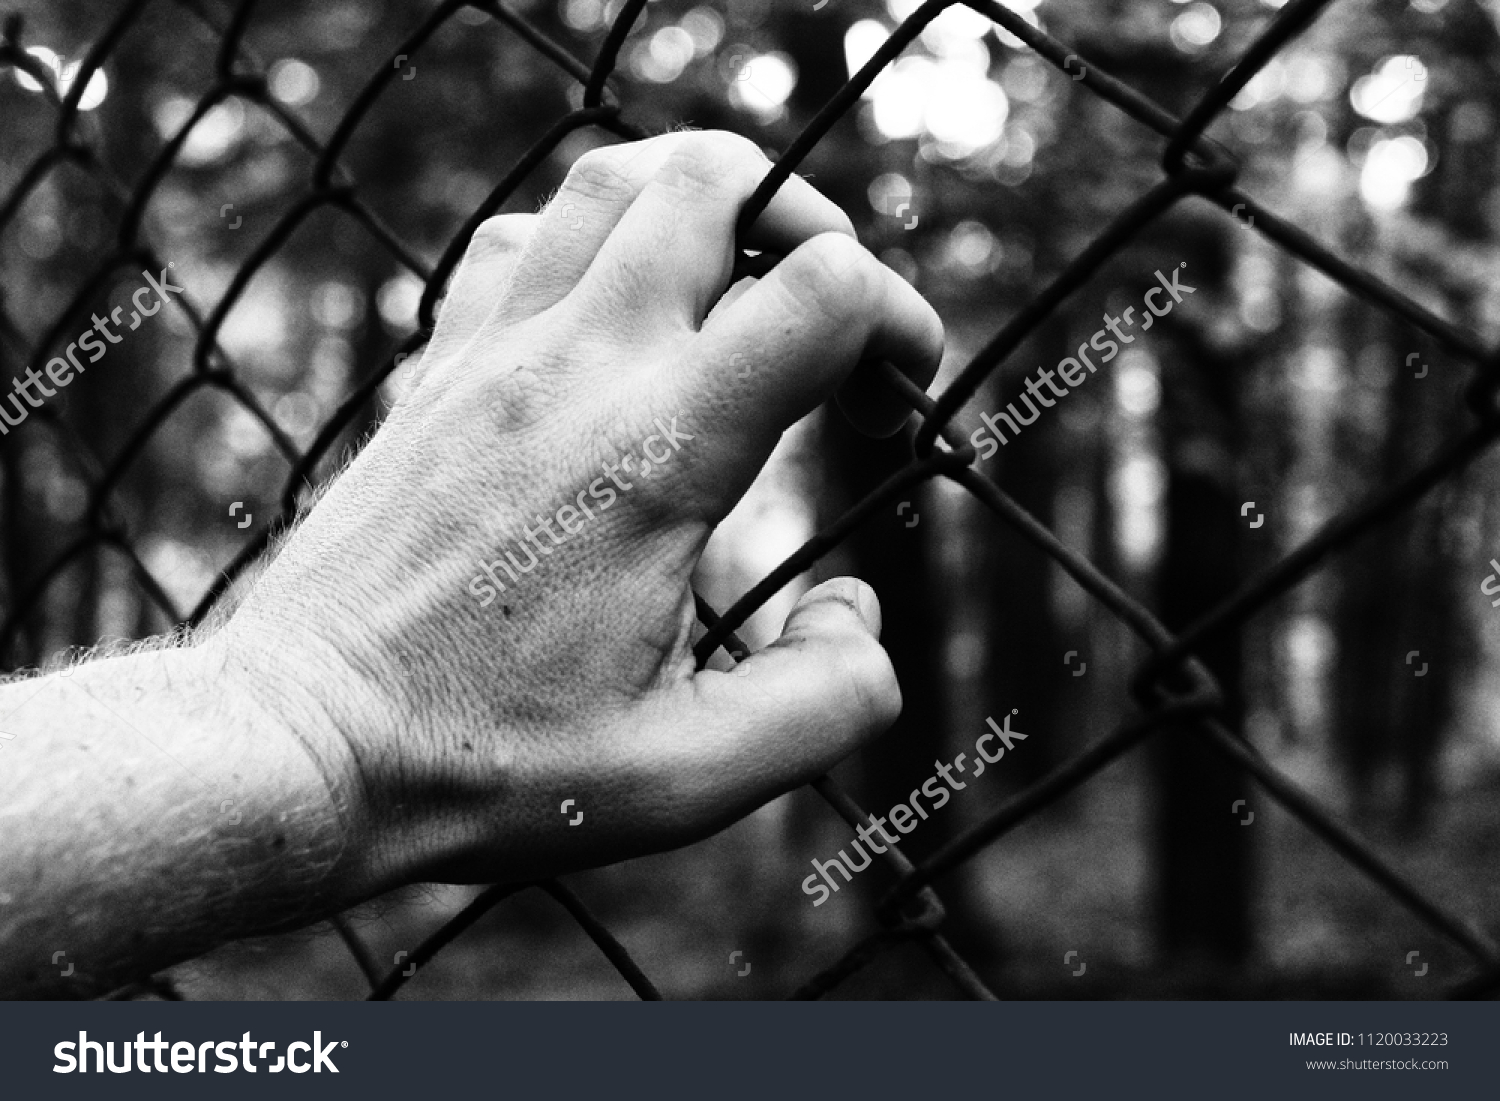 A hand and a fence that symbolizes captivity and a desire for freedom #1120033223